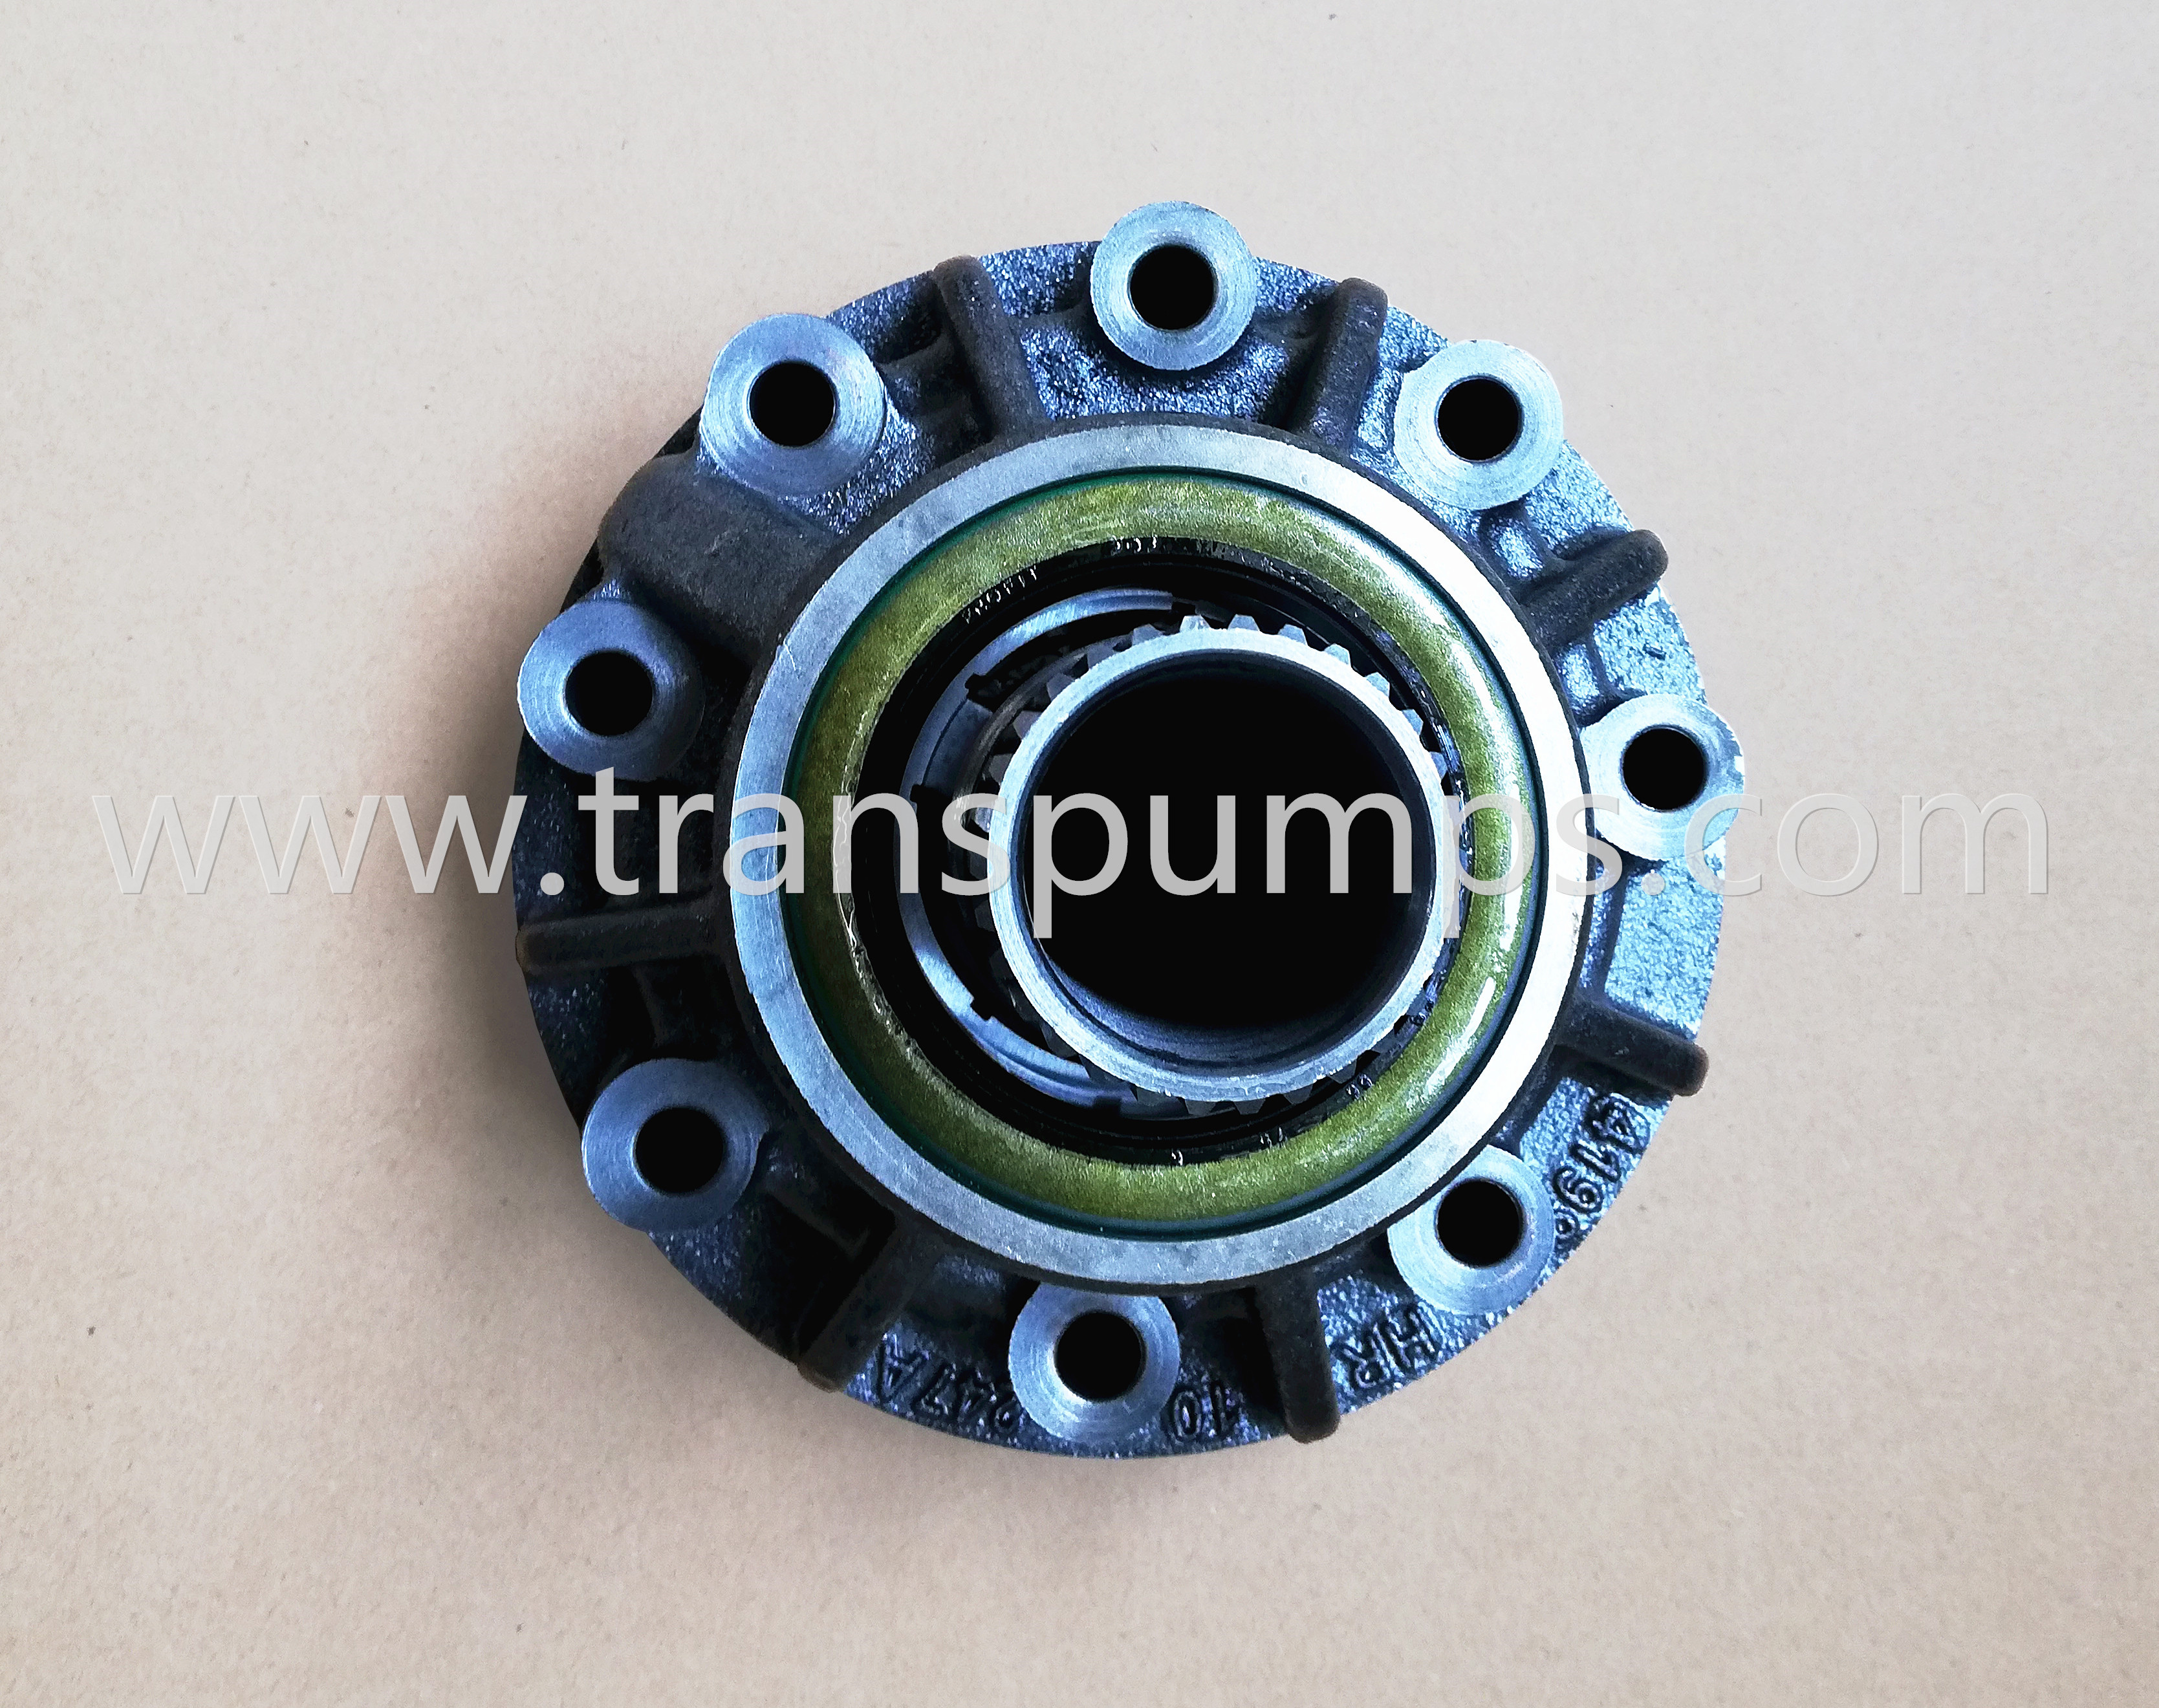 ZF pump manufacturer, ZF pump 050122220664, ZF transmission oil pump assembly, transmission pump for sell, John deere backhoe charge pump, ZF Pump Assembly Transmission, ZF transmission pump assembly 0501220664, Насос, 0501.220.664 OR 0501220664 OR 0501-220-664 OR 0501 220 664 ZF, ZF 0501220664 pumpe, New original ZF 0501220664 pump, ZF bomba, ZF pompa, ZF hacoc, ZF pumpe, ZF pompe